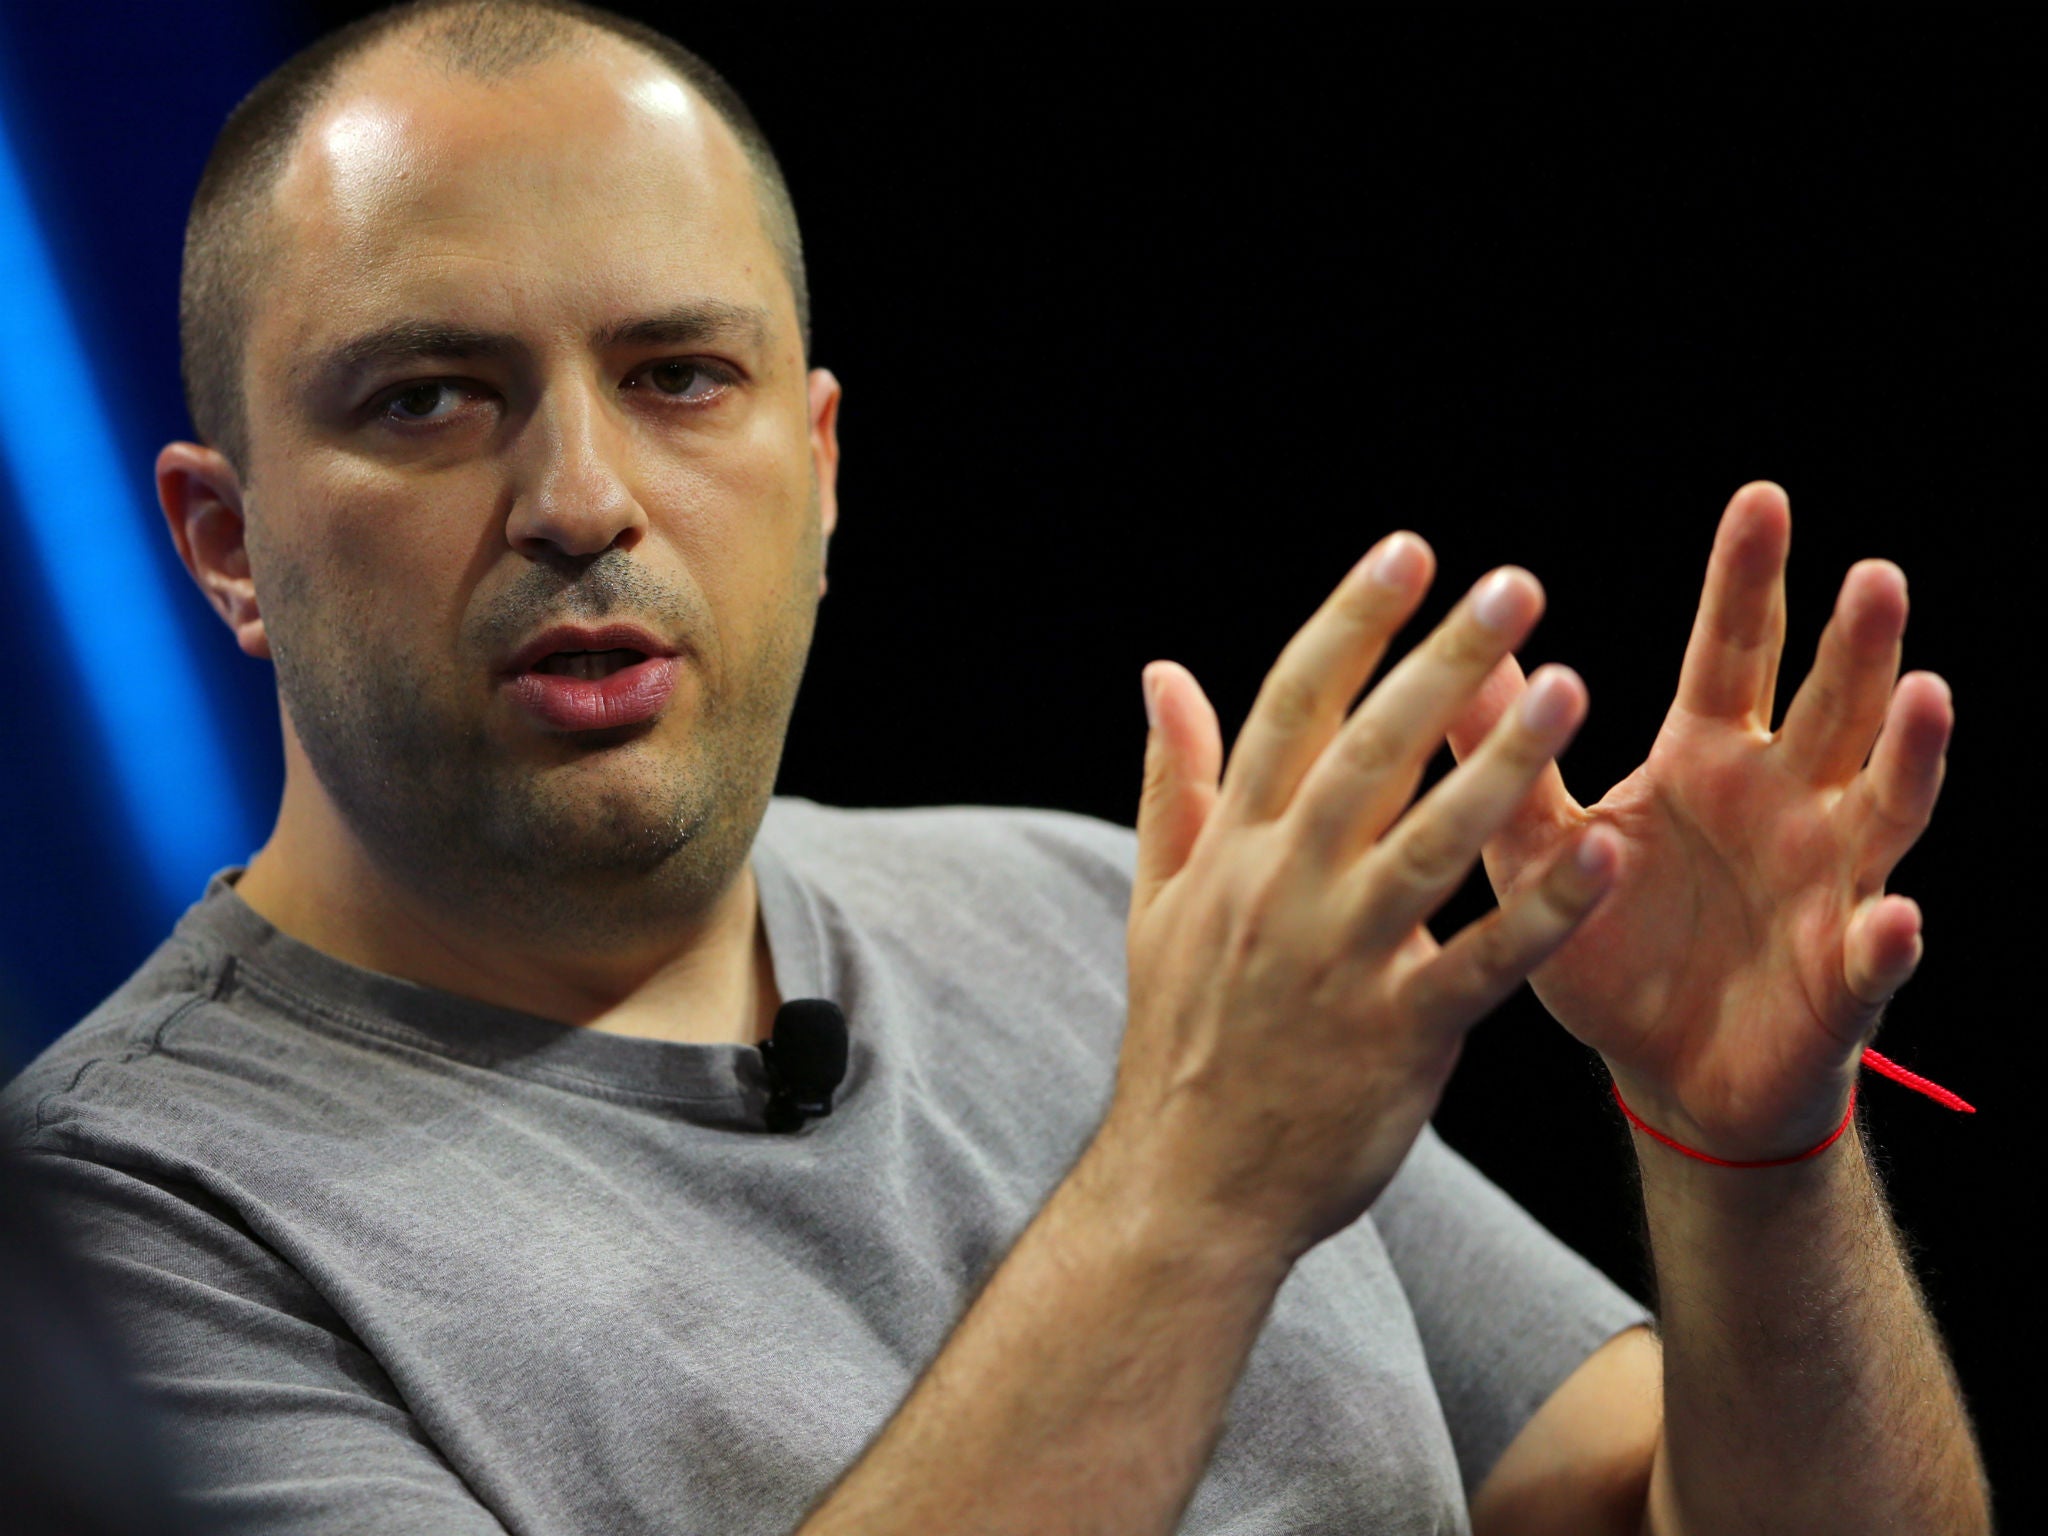 Jan Koum once described ads on social media as an ‘insult to your intelligence’